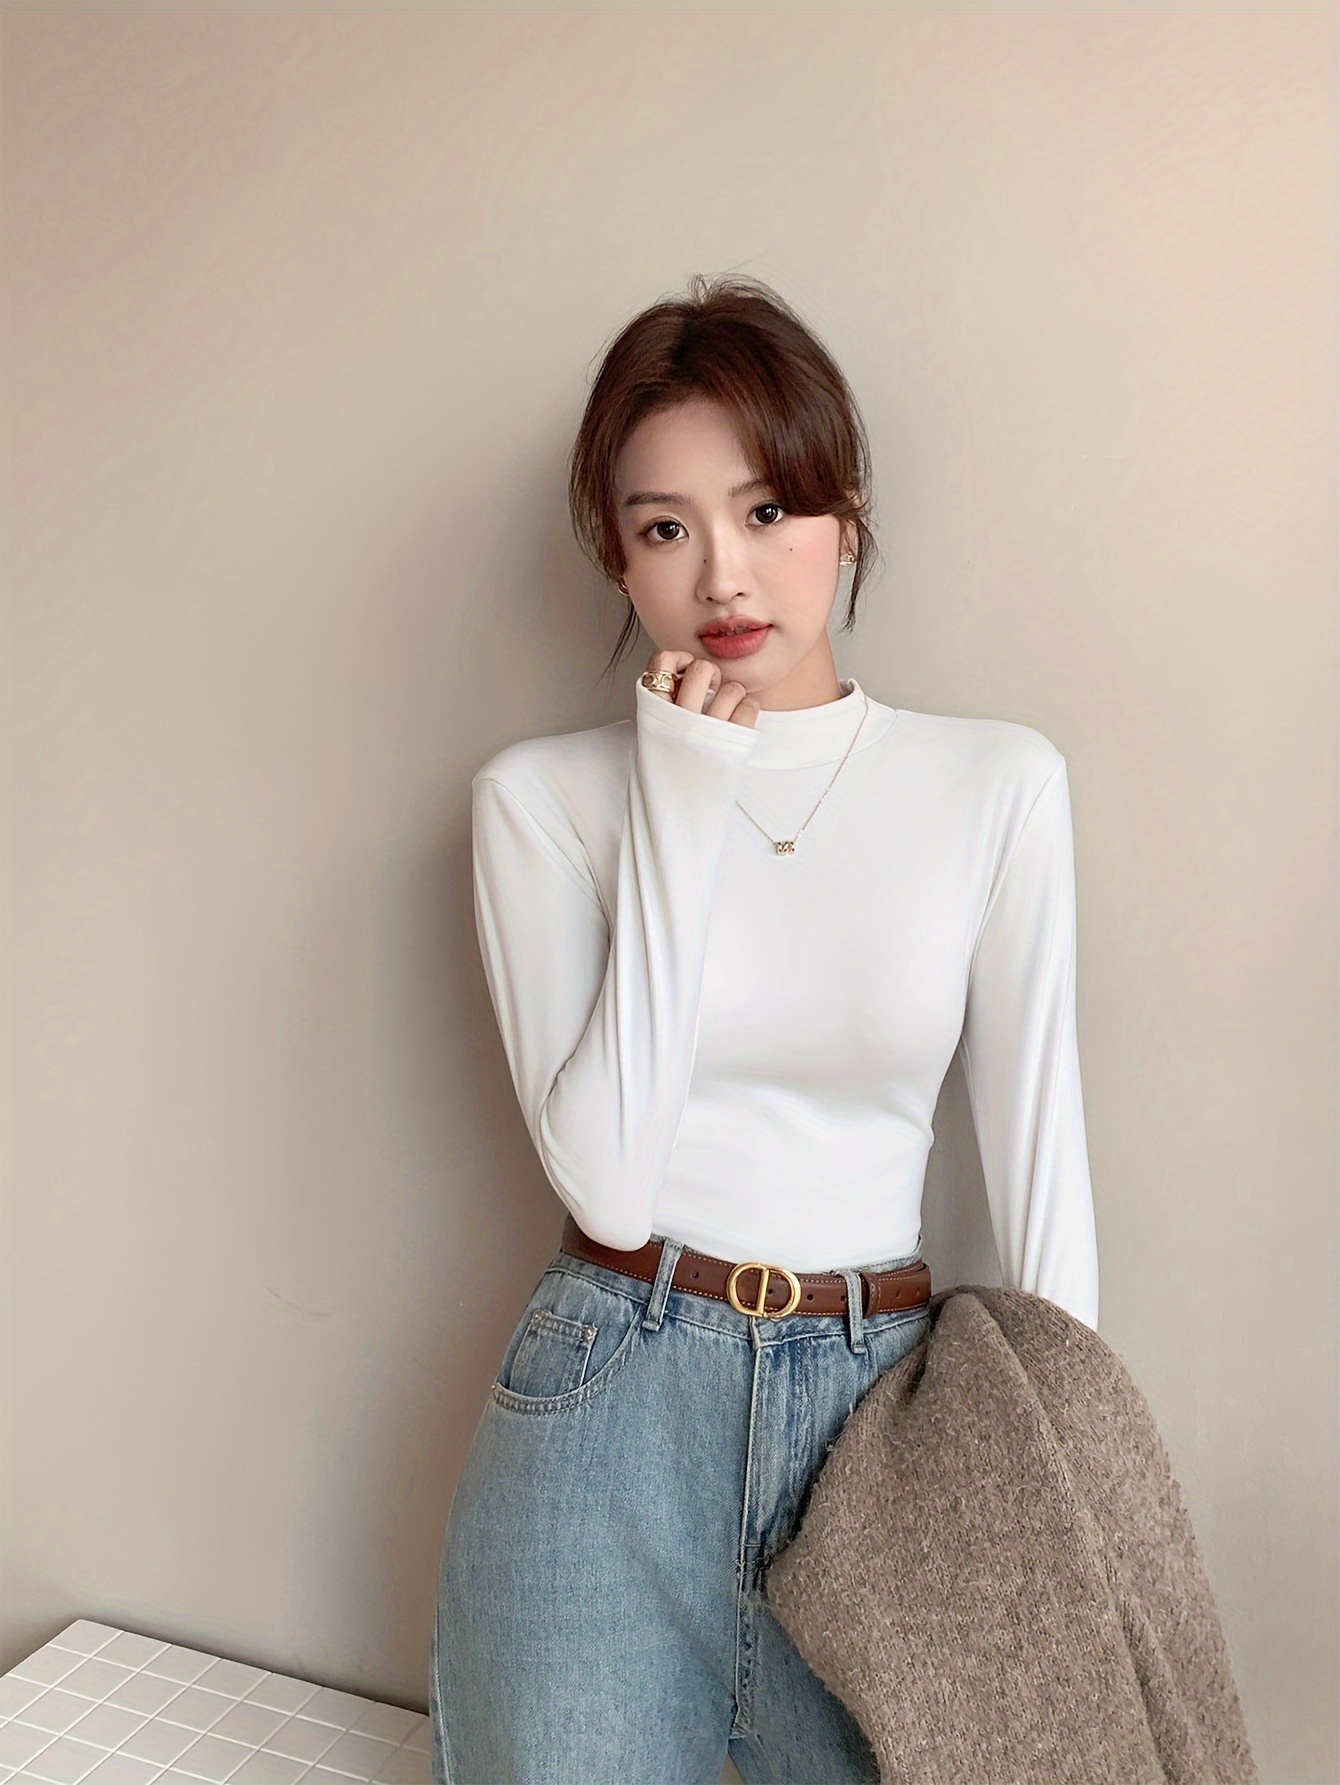 Women Mock Neck Knit Top, Casual Long Sleeve Solid Color Tee Shirt